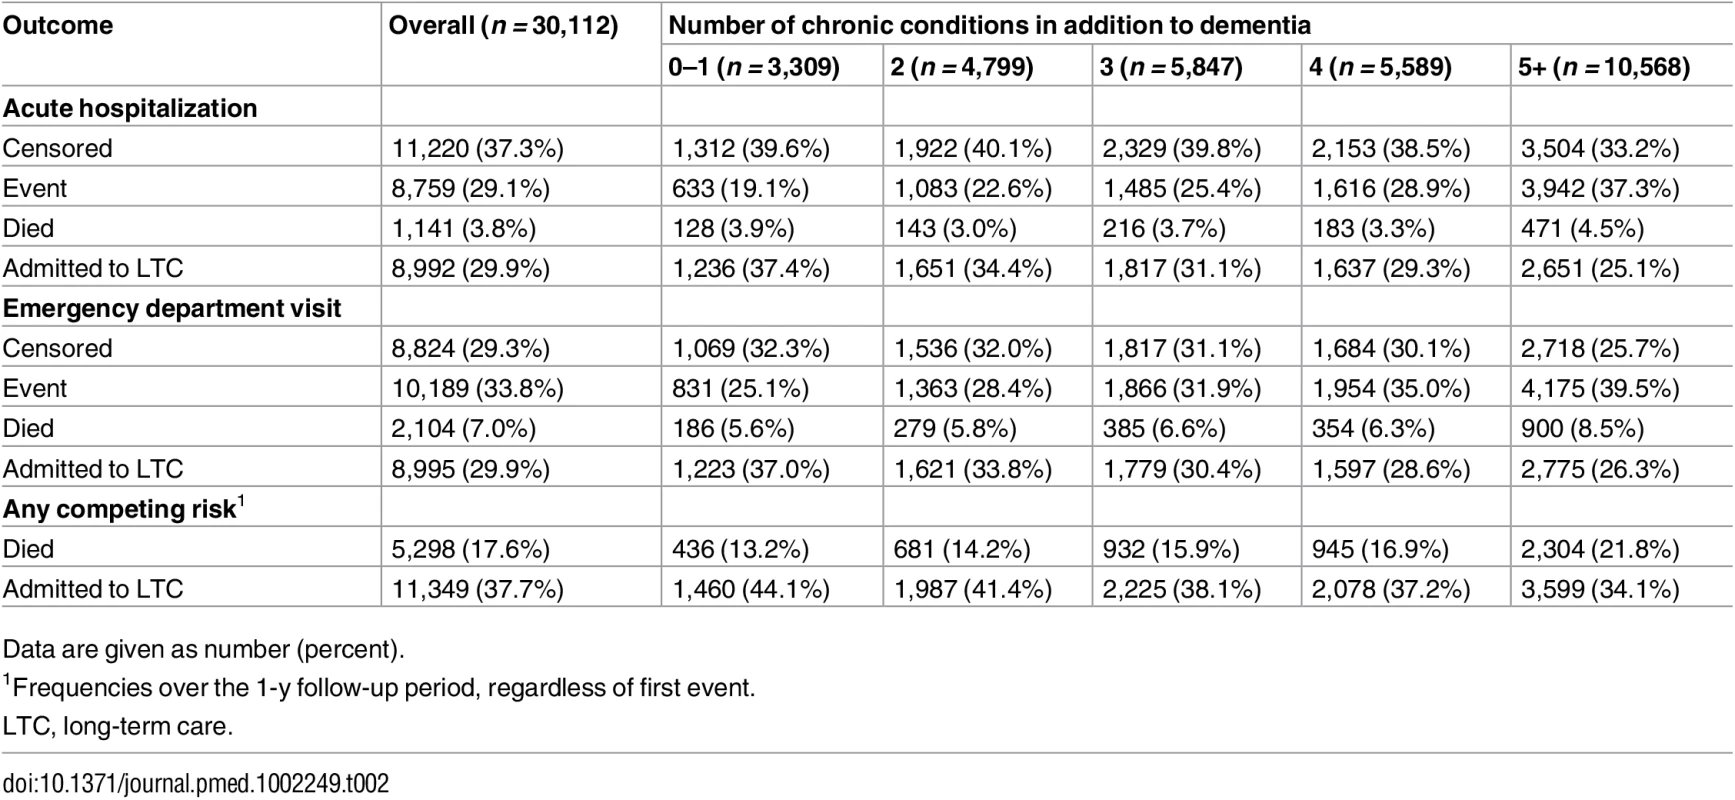 Proportion of long-stay home care clients with dementia in Ontario in 2012 who experienced each outcome (any acute hospitalization or any emergency department visit) during the 1-y follow-up period, accounting for multiple competing risks (death, long-term care admission, censoring at end of follow-up).